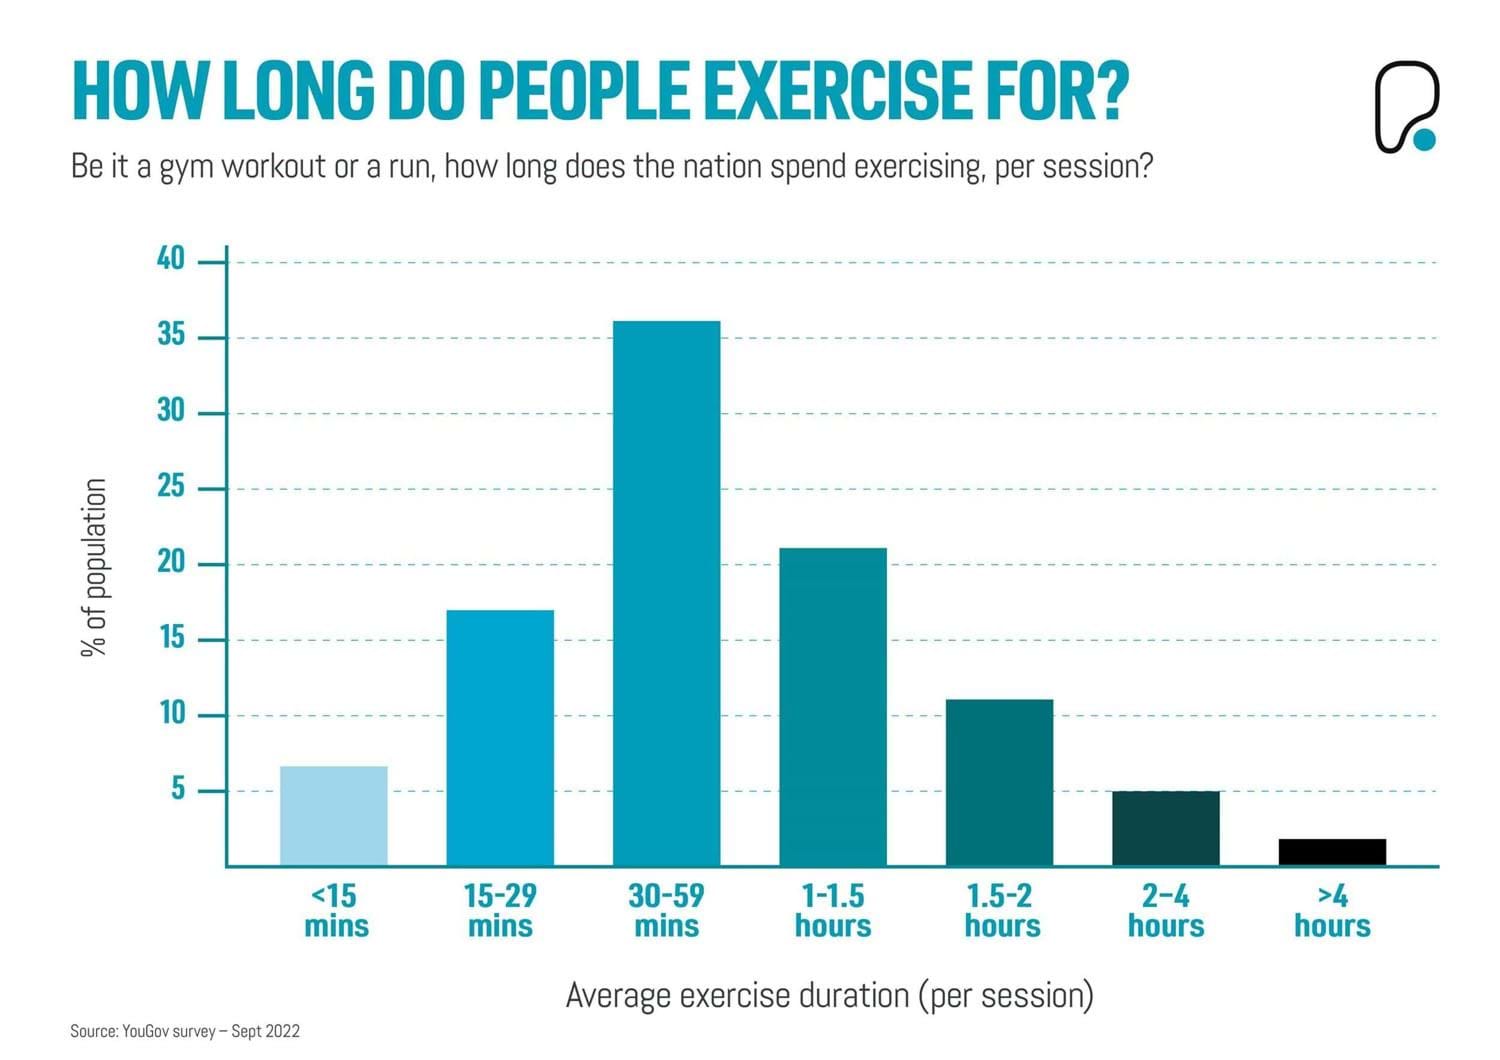 How long do people exercise for?